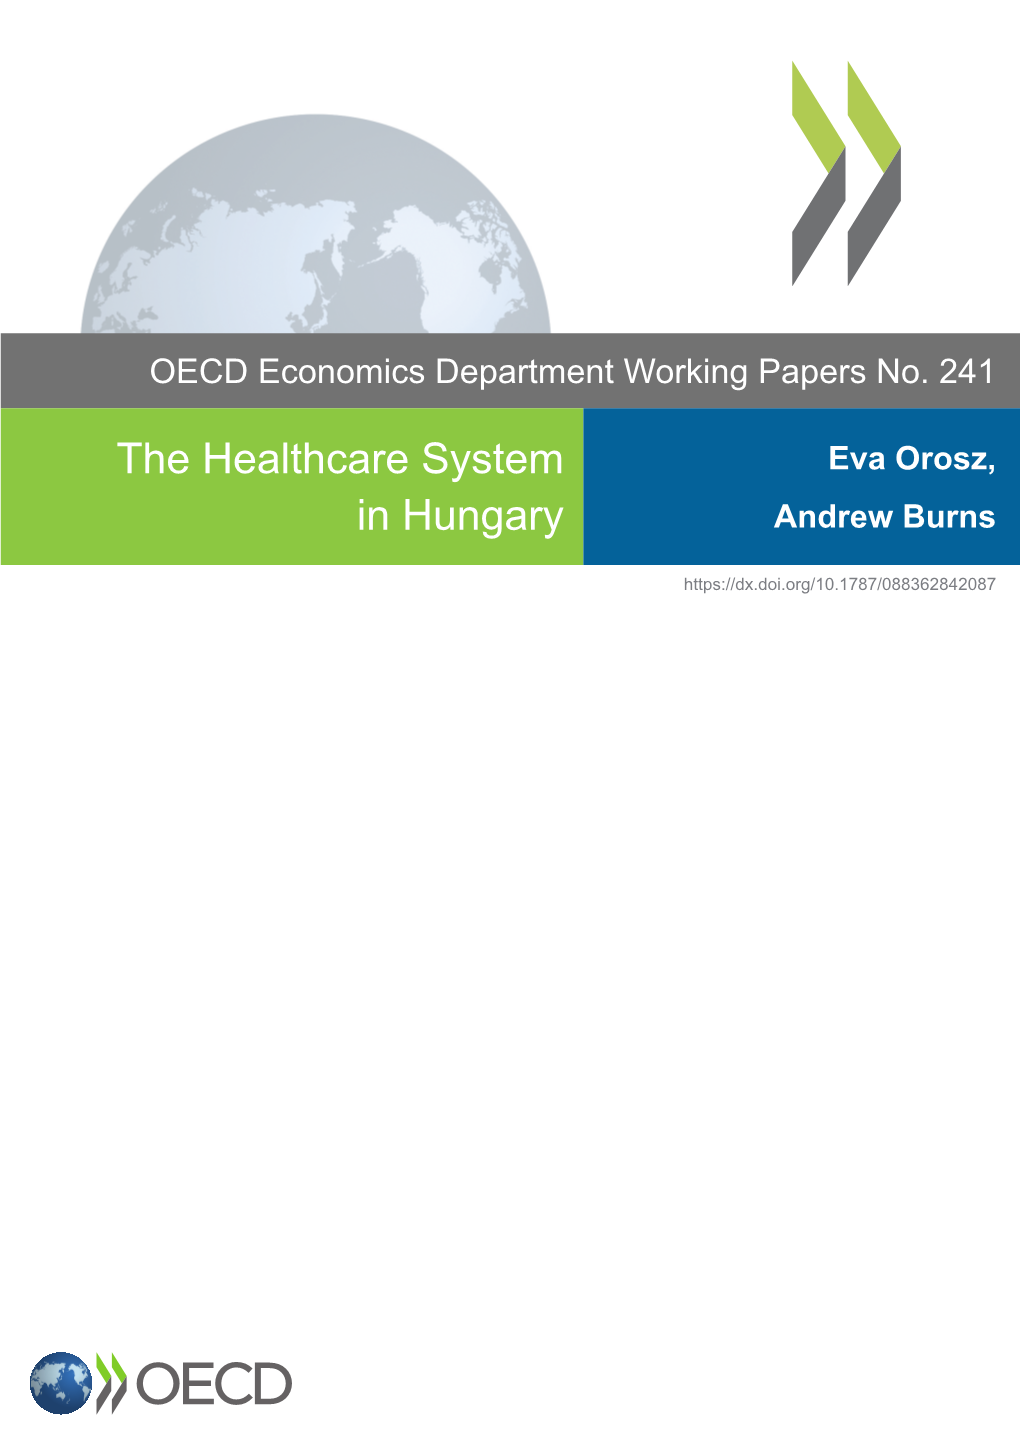 The Healthcare System in Hungary